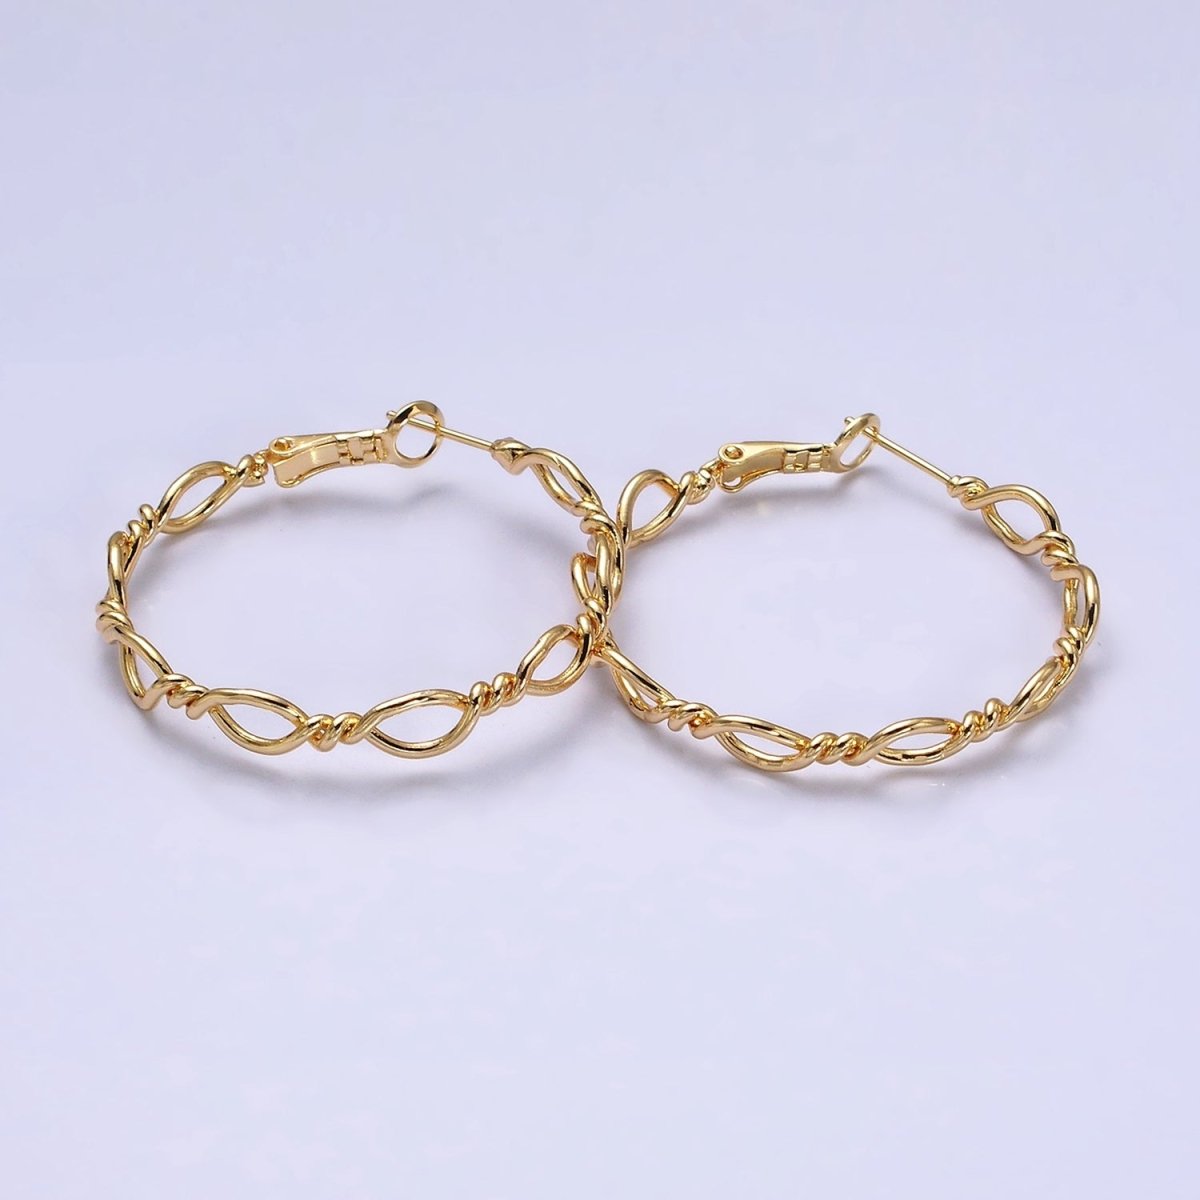 16K Gold Filled 40mm Twisted Band Chain Link Hinge Hoop Earrings in Gold & Silver | AD1072 AD1073 - DLUXCA